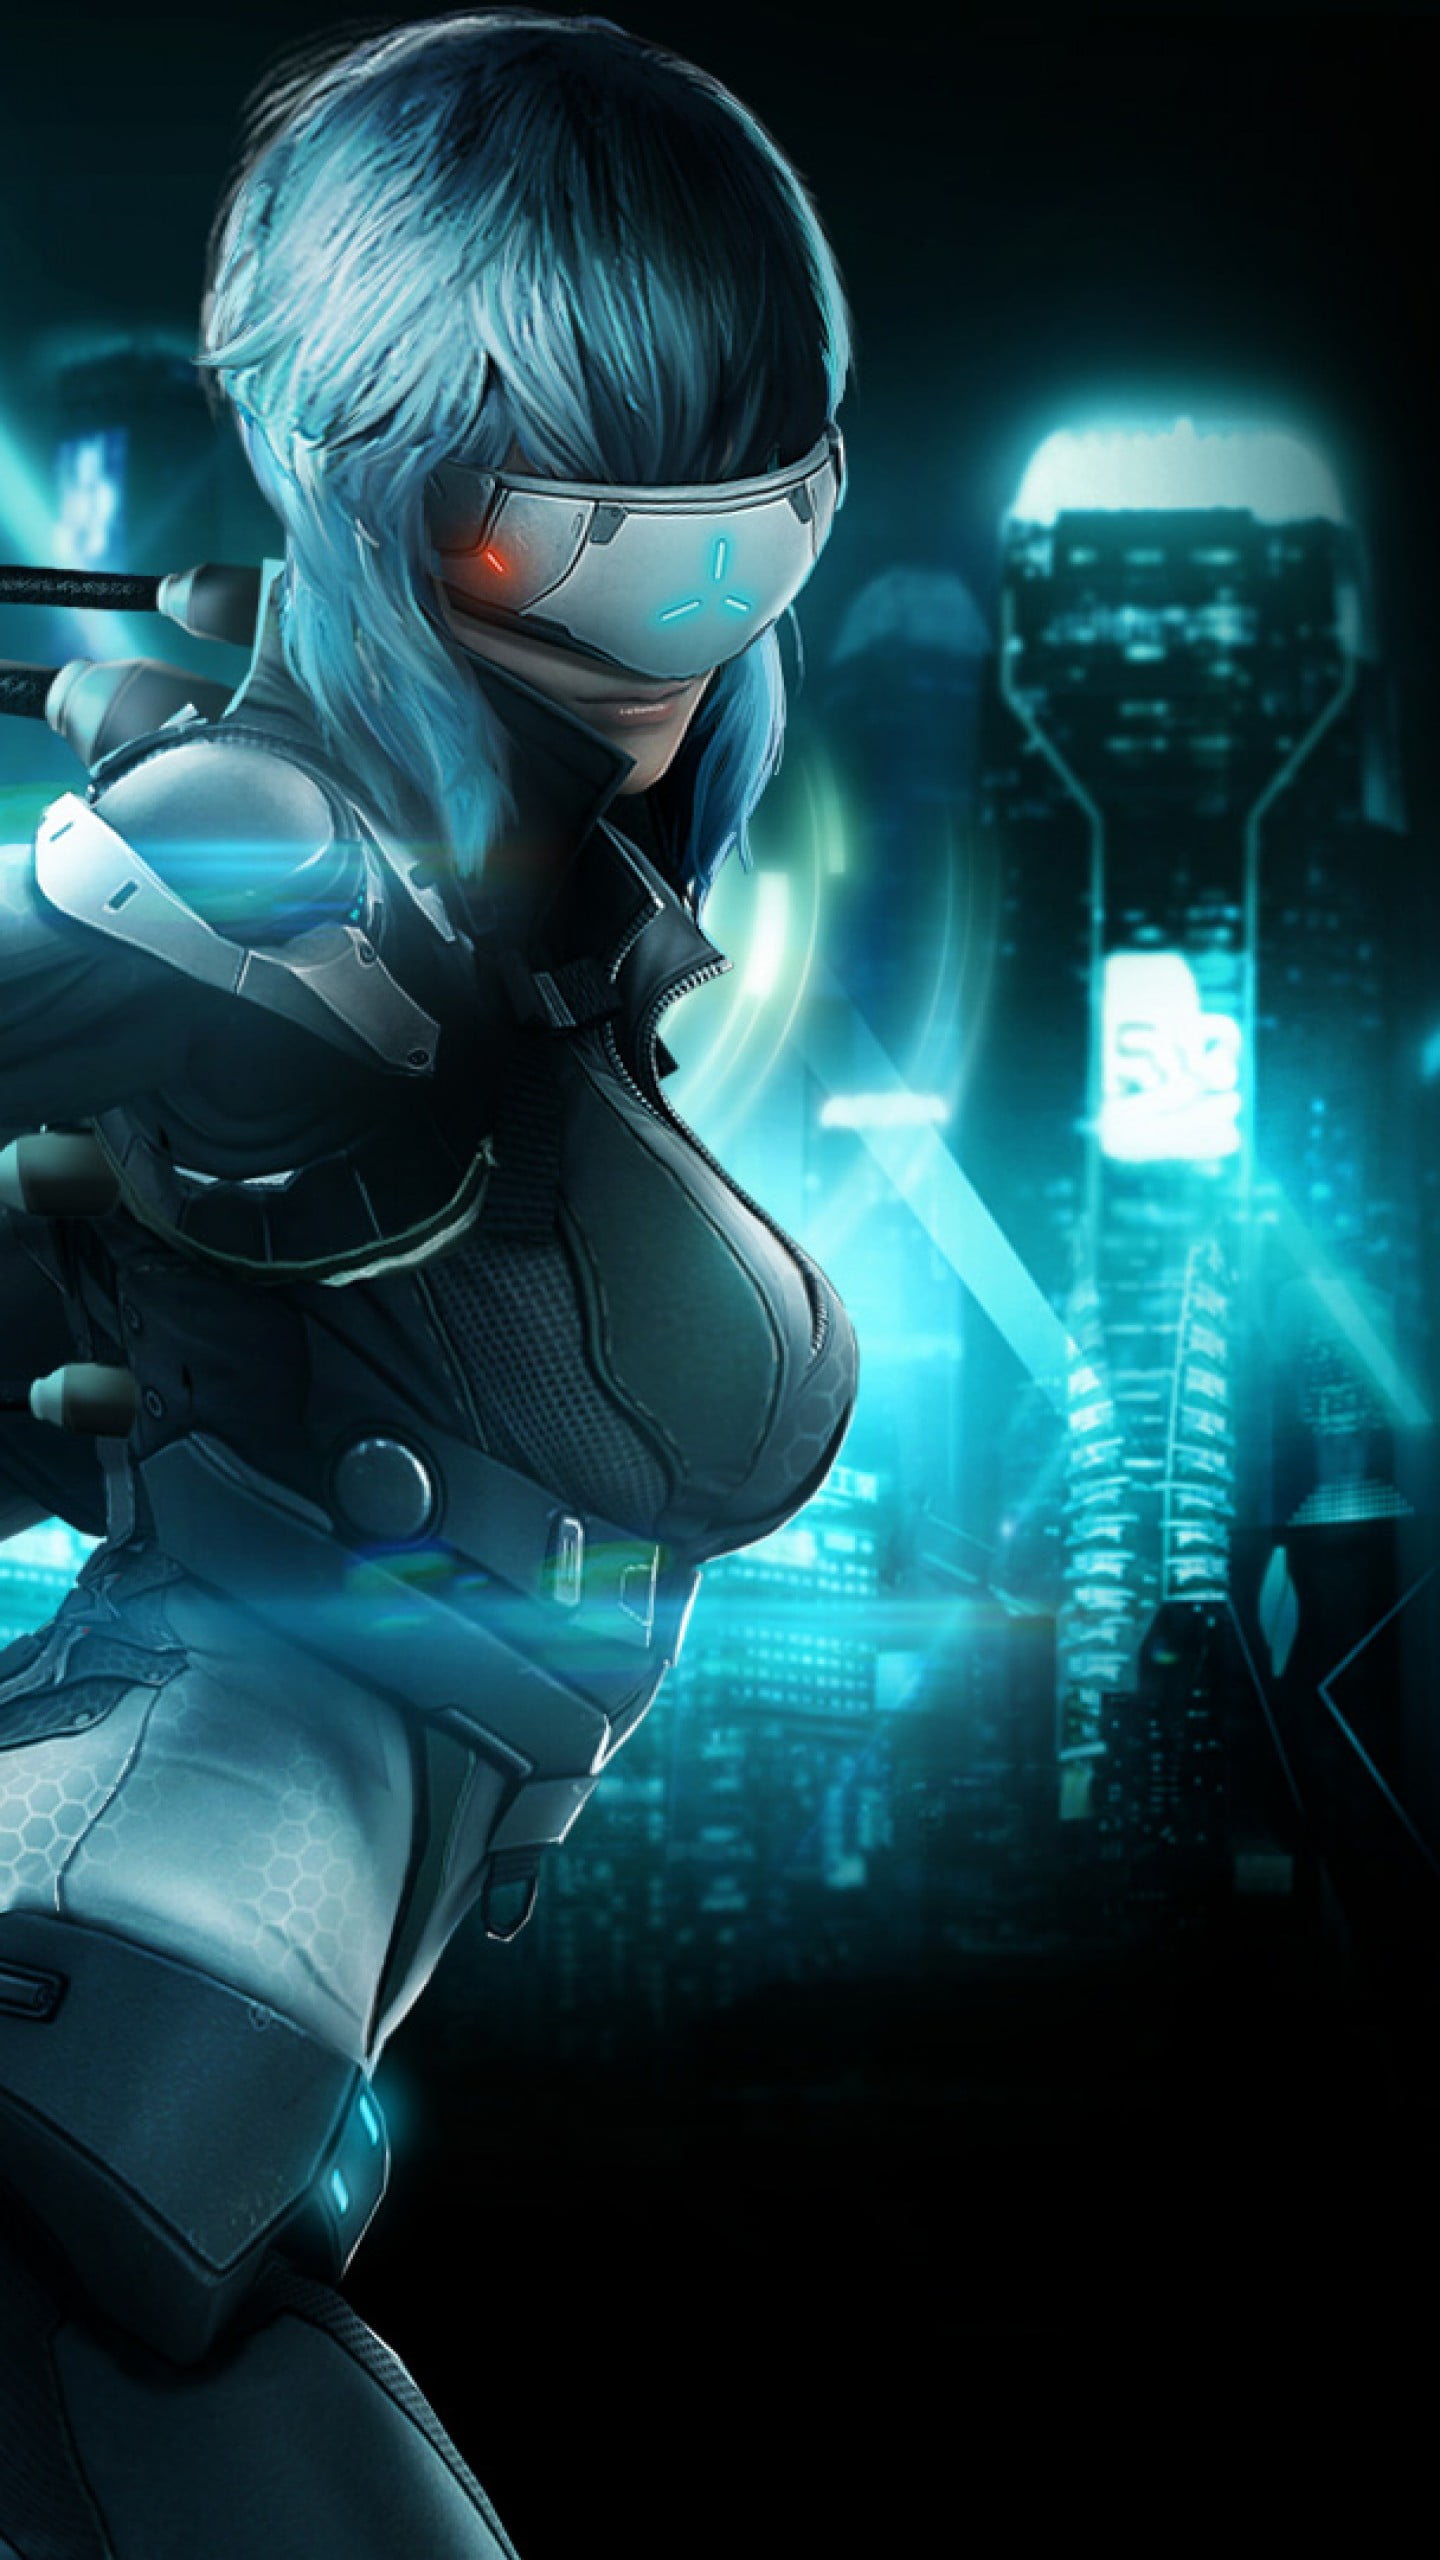 Ghost In The Shell Iphone Wallpapers